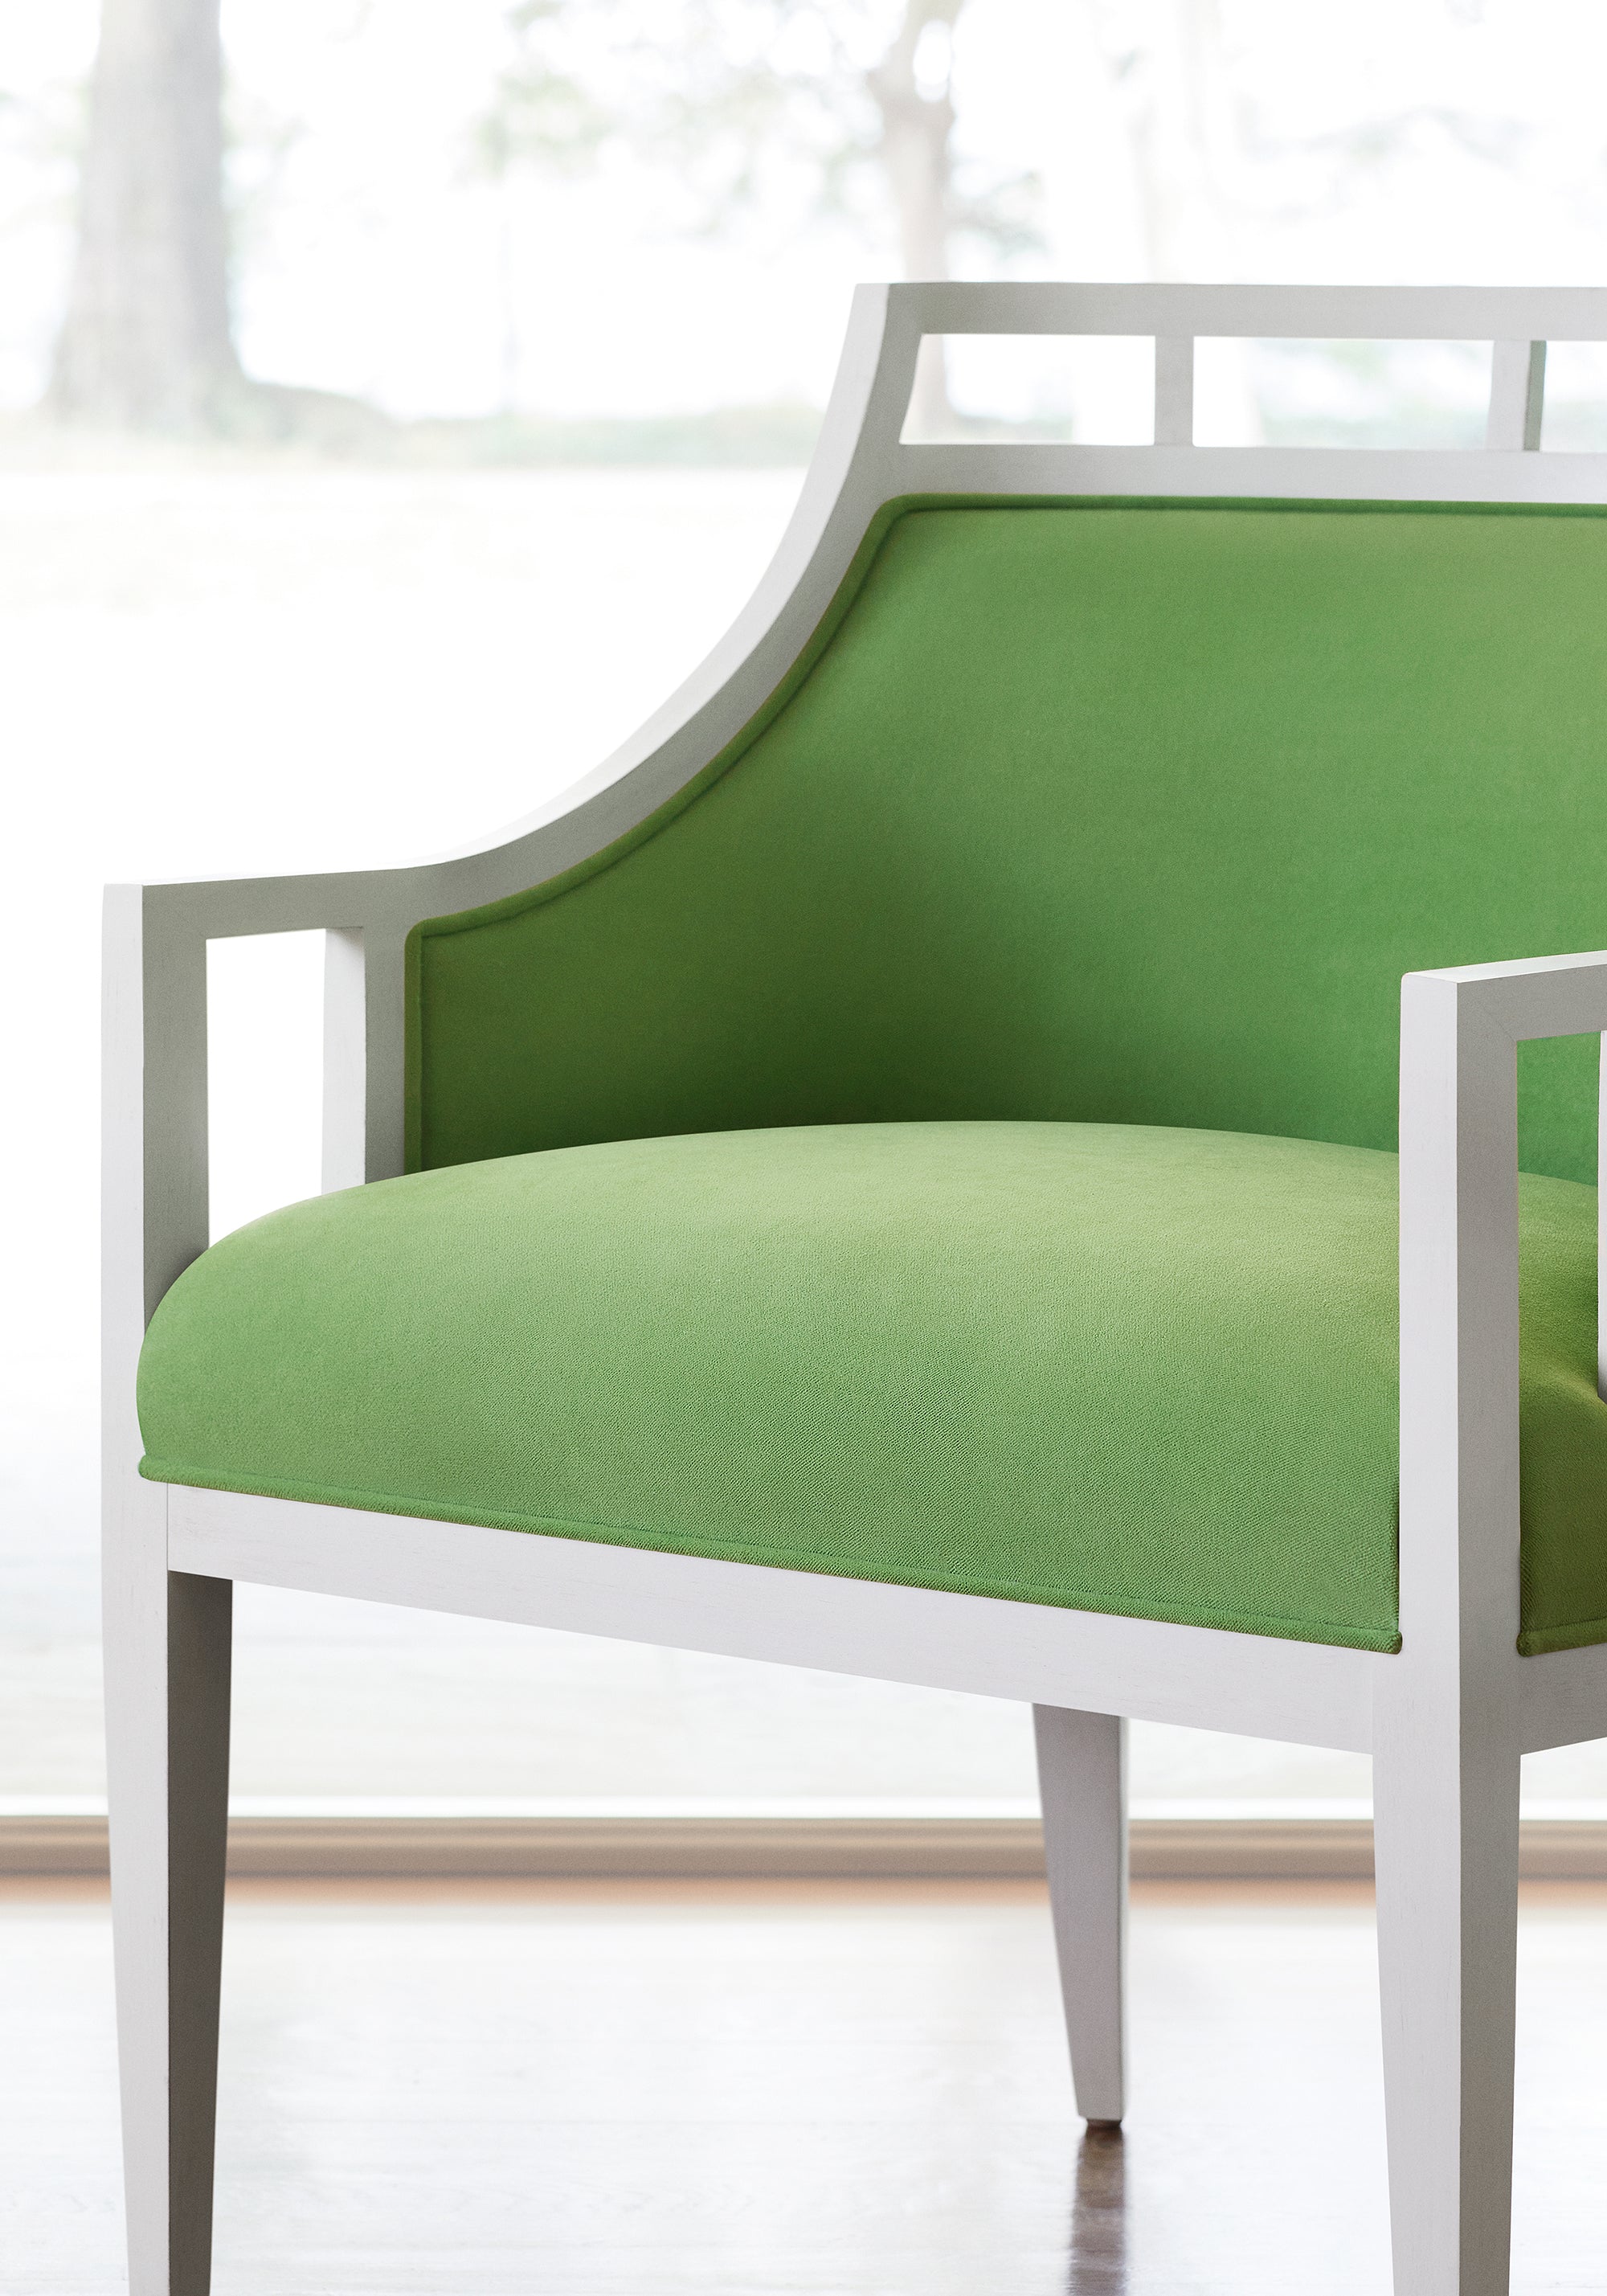 Detailed view of Malibu Chair in Club Velvet sustainable woven fabric in grass color variant by Thibaut in the Club Velvet collection - pattern number W7254